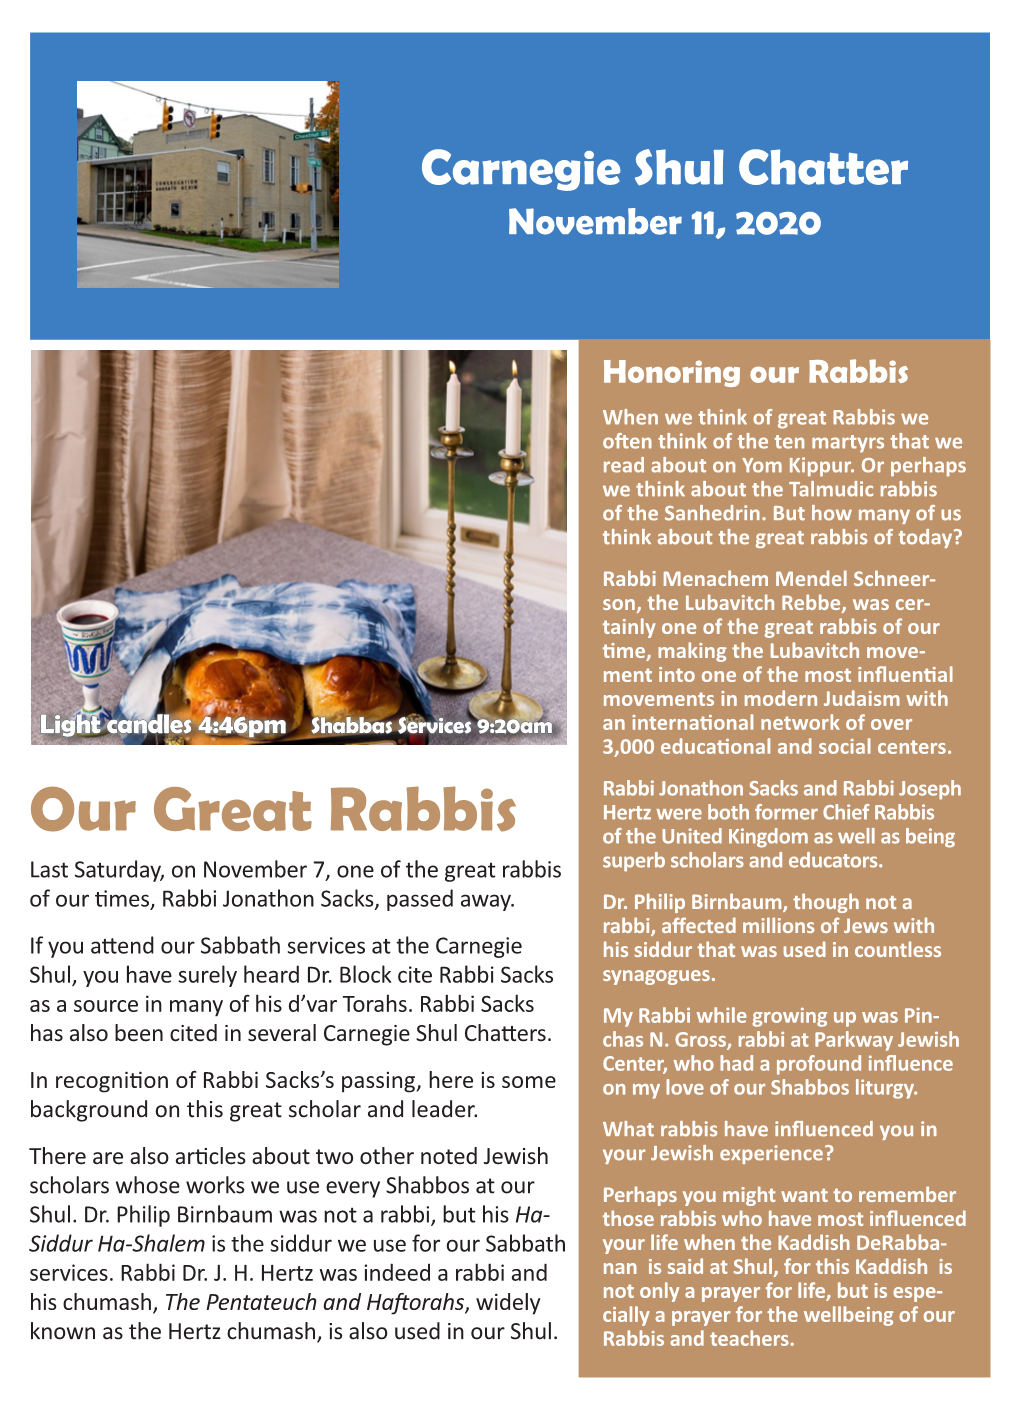 Carnegie Shul Chatter November 11, 2020 Our Great Rabbis